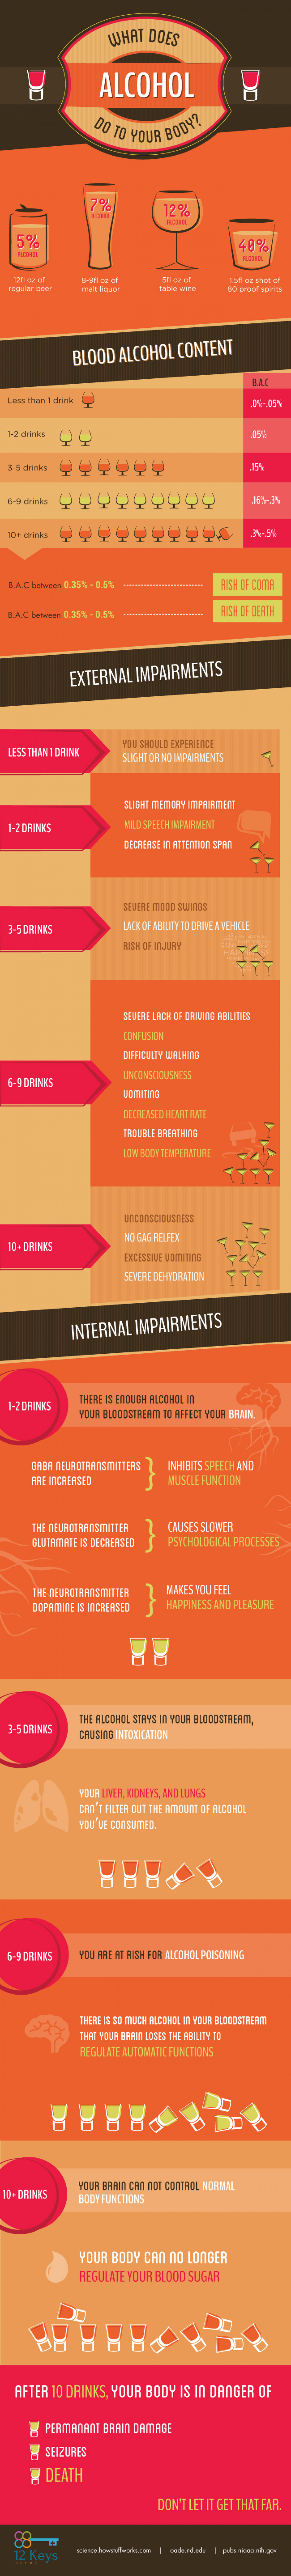 What Does Alcohol Do To Your Body? Infographic